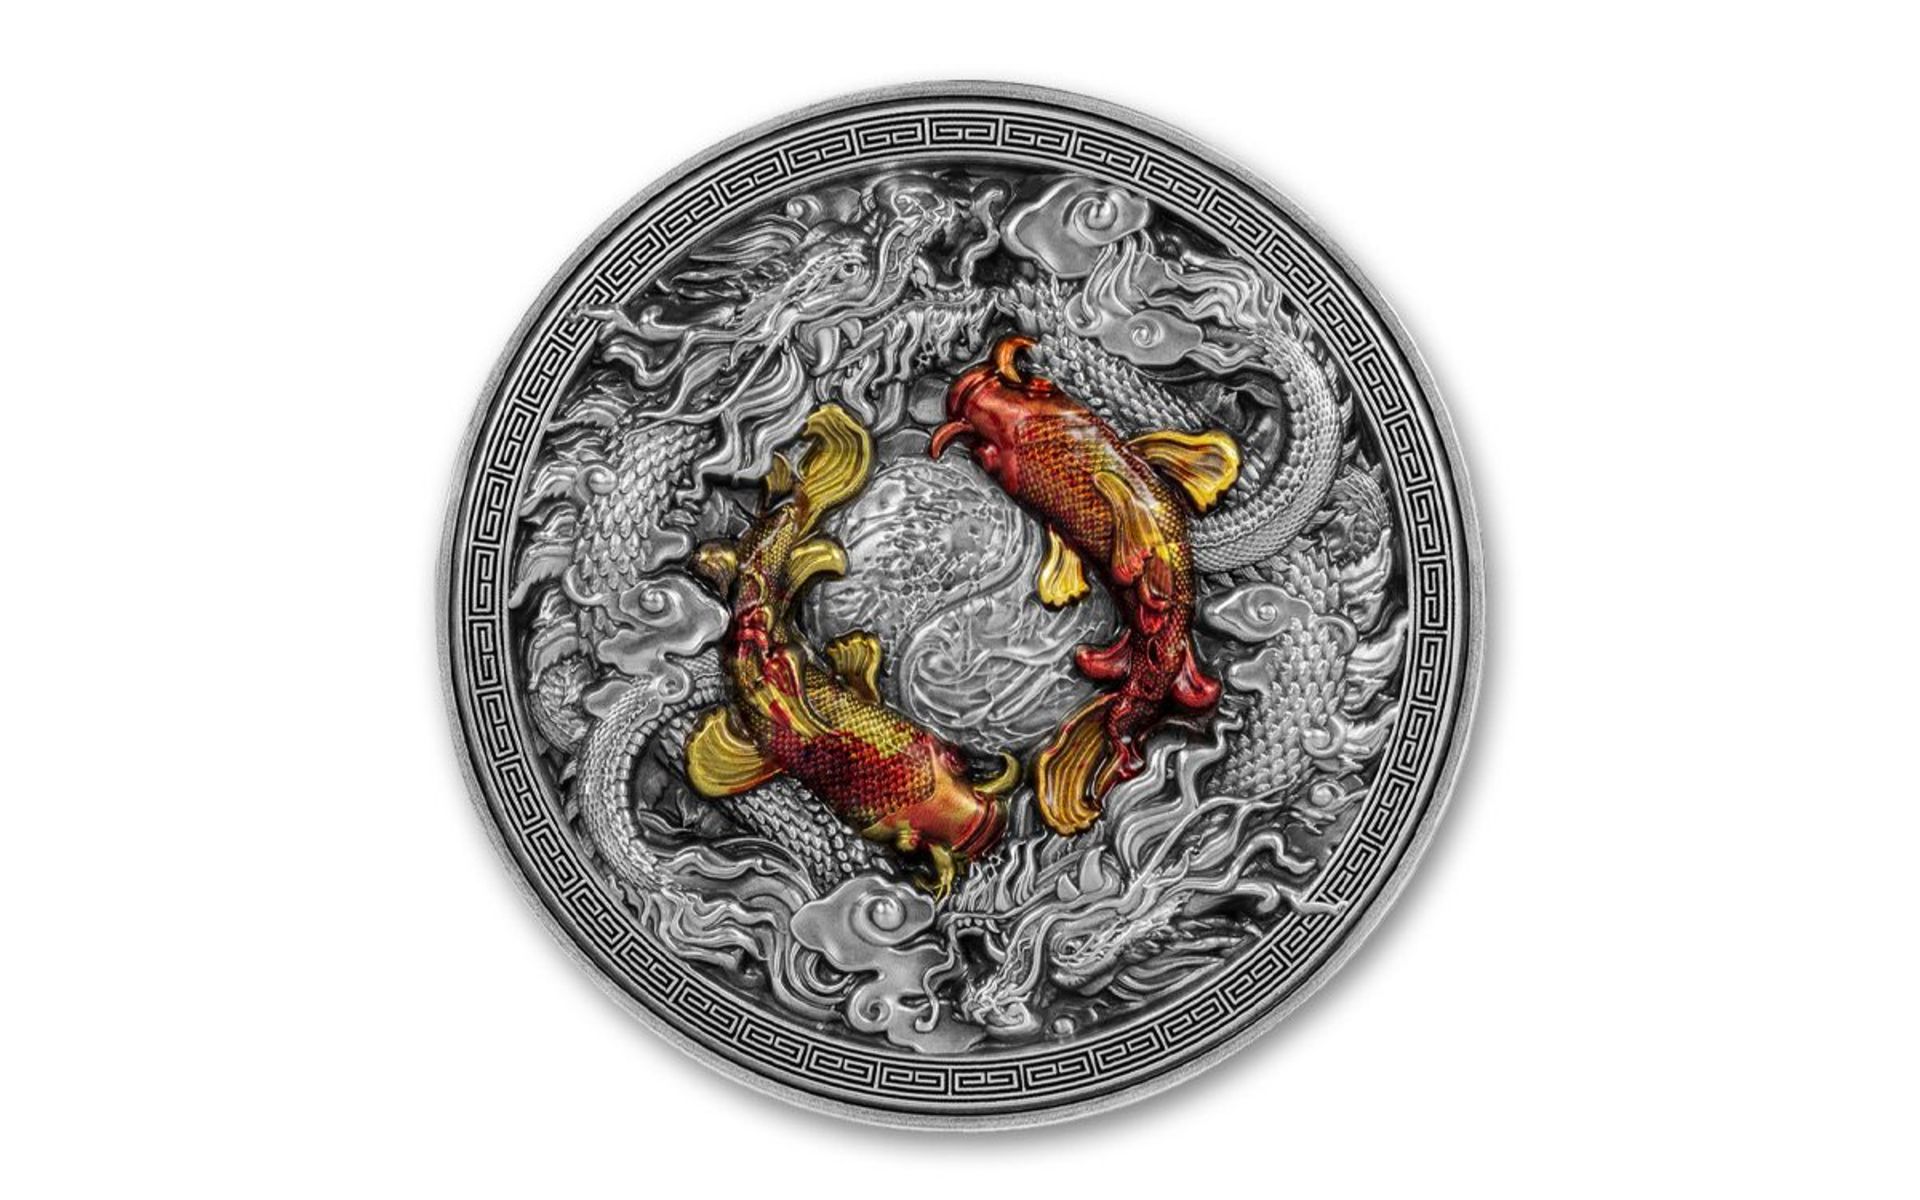 2023 13.5 oz Antique Bi-Metal Republic of Chad Koi And Dragons Coins (High Relief) - Image 3 of 4